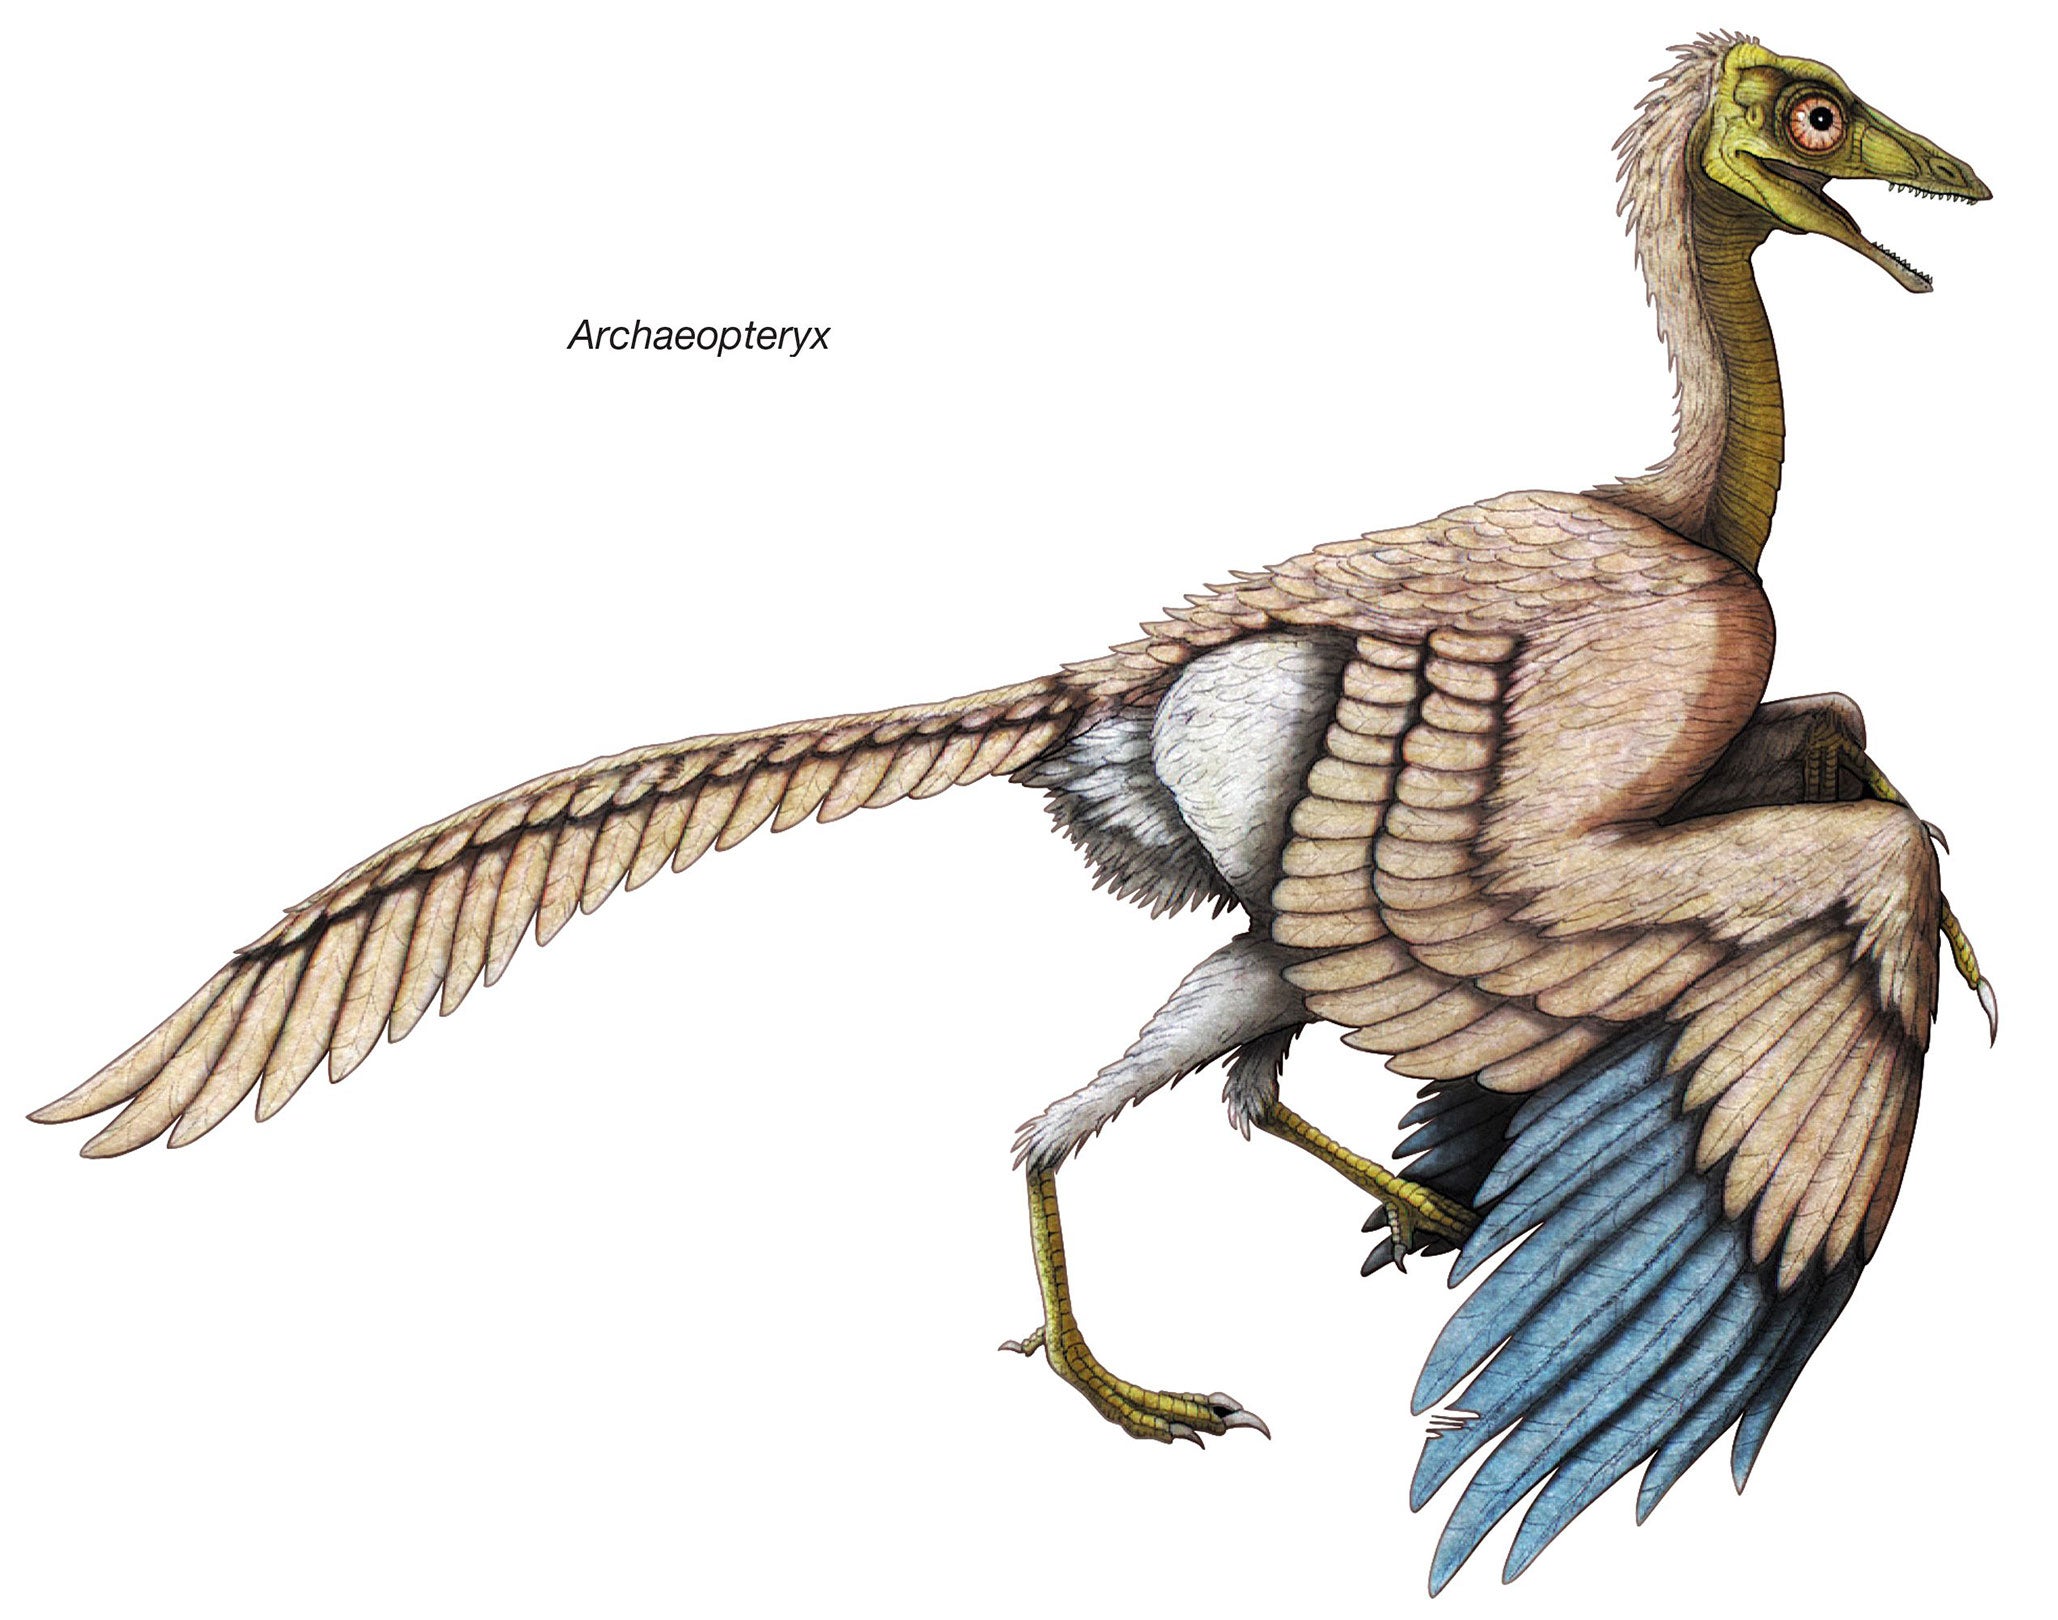 How the Archaeopteryx may have looked 